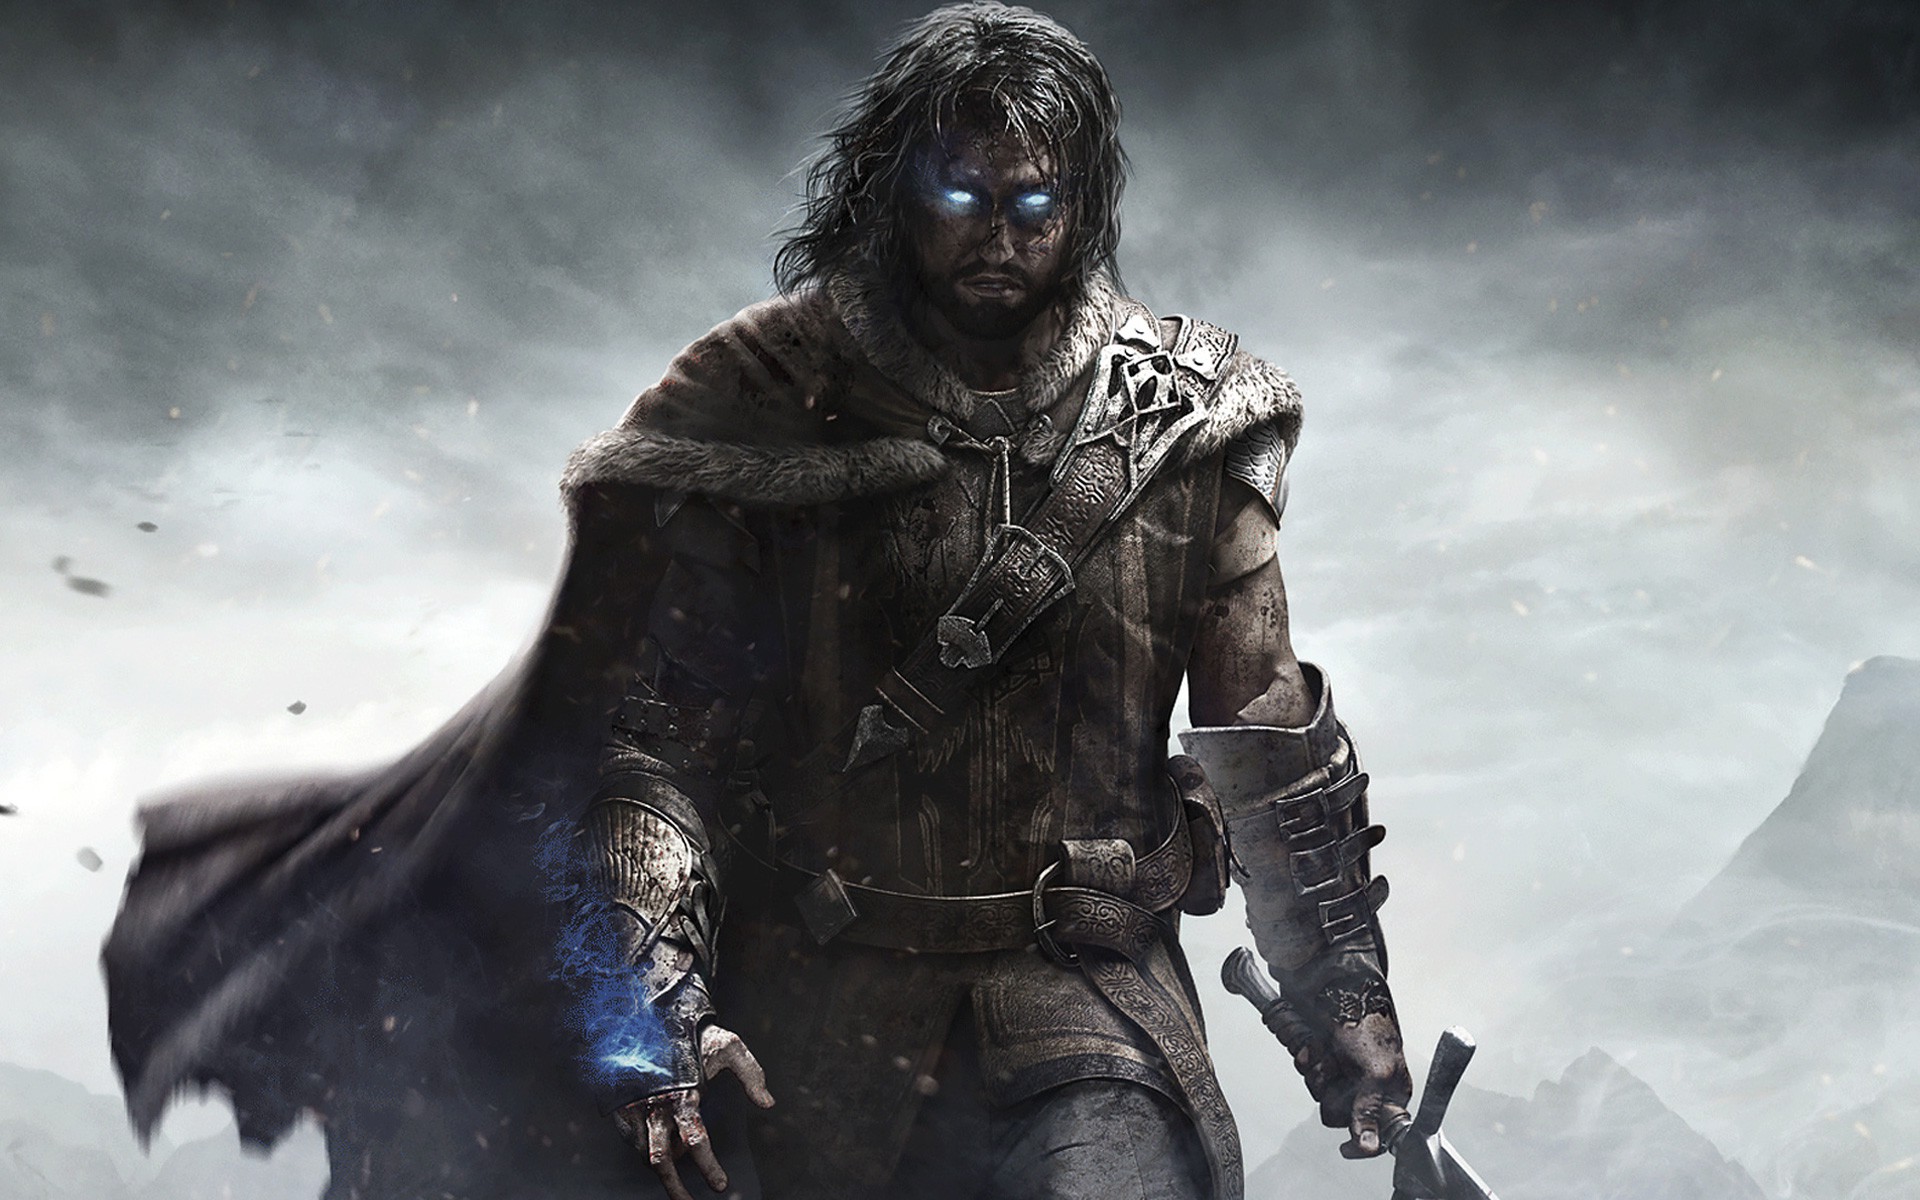 Middle-earth: Shadow of Mordor - Wikipedia